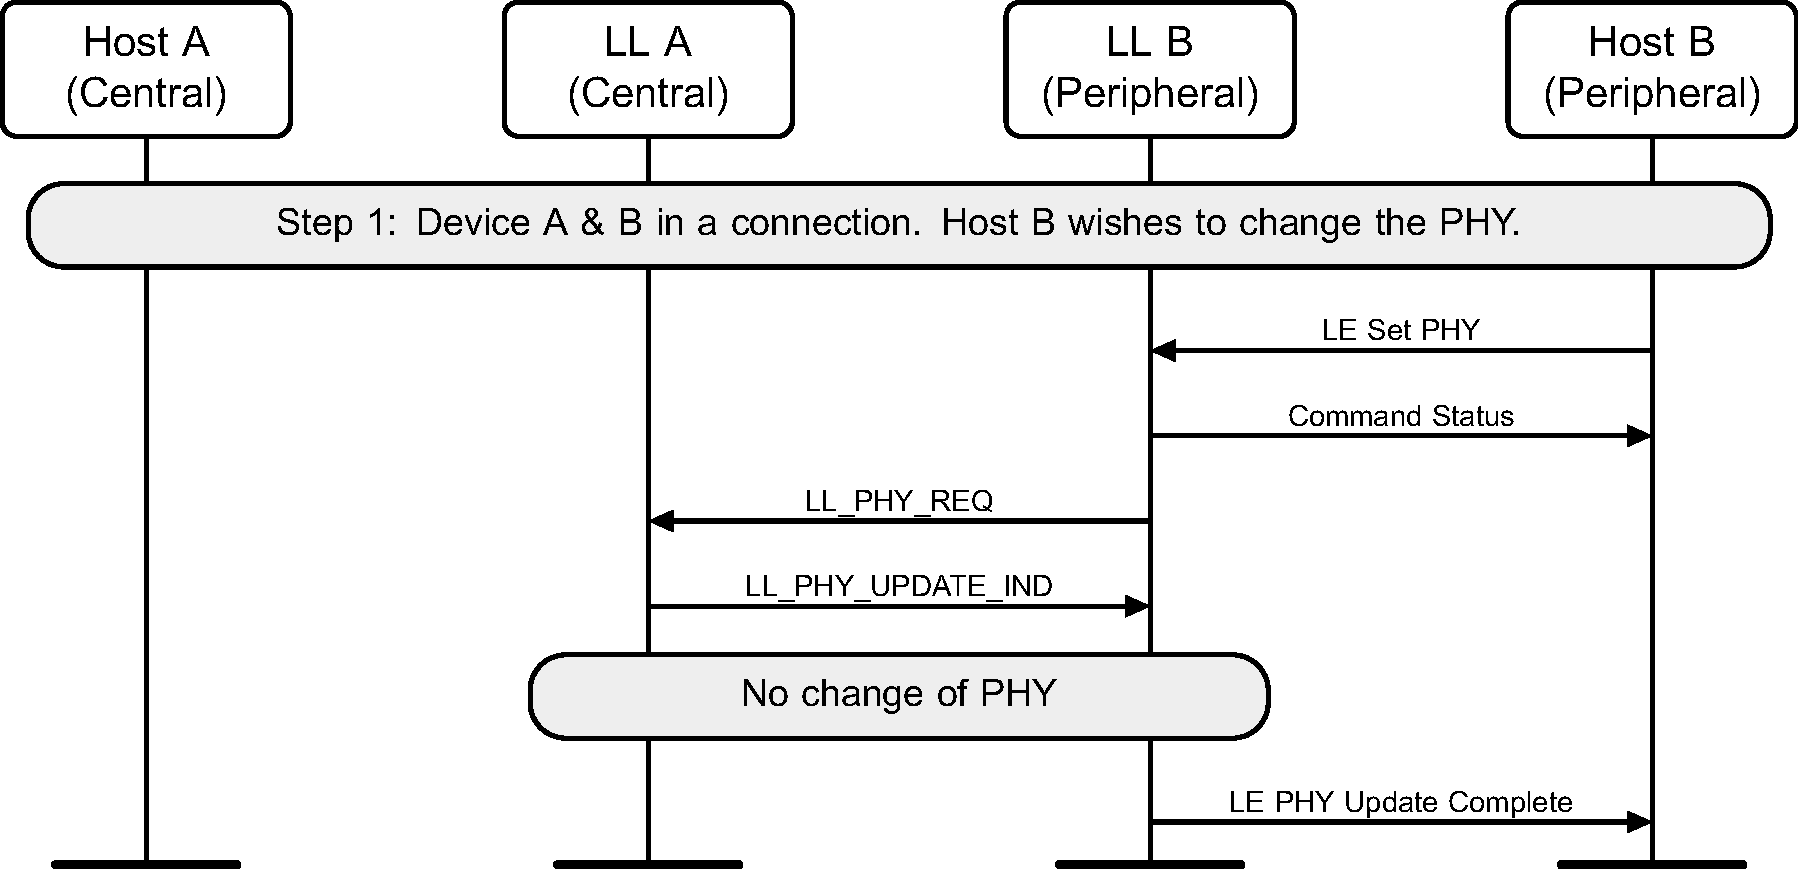 Peripheral-initiated PHY Update procedure – PHY not changed (either because Peripheral doesn't specify PHYs that the Central prefers, or because the Central concludes that the current PHYs are still best)